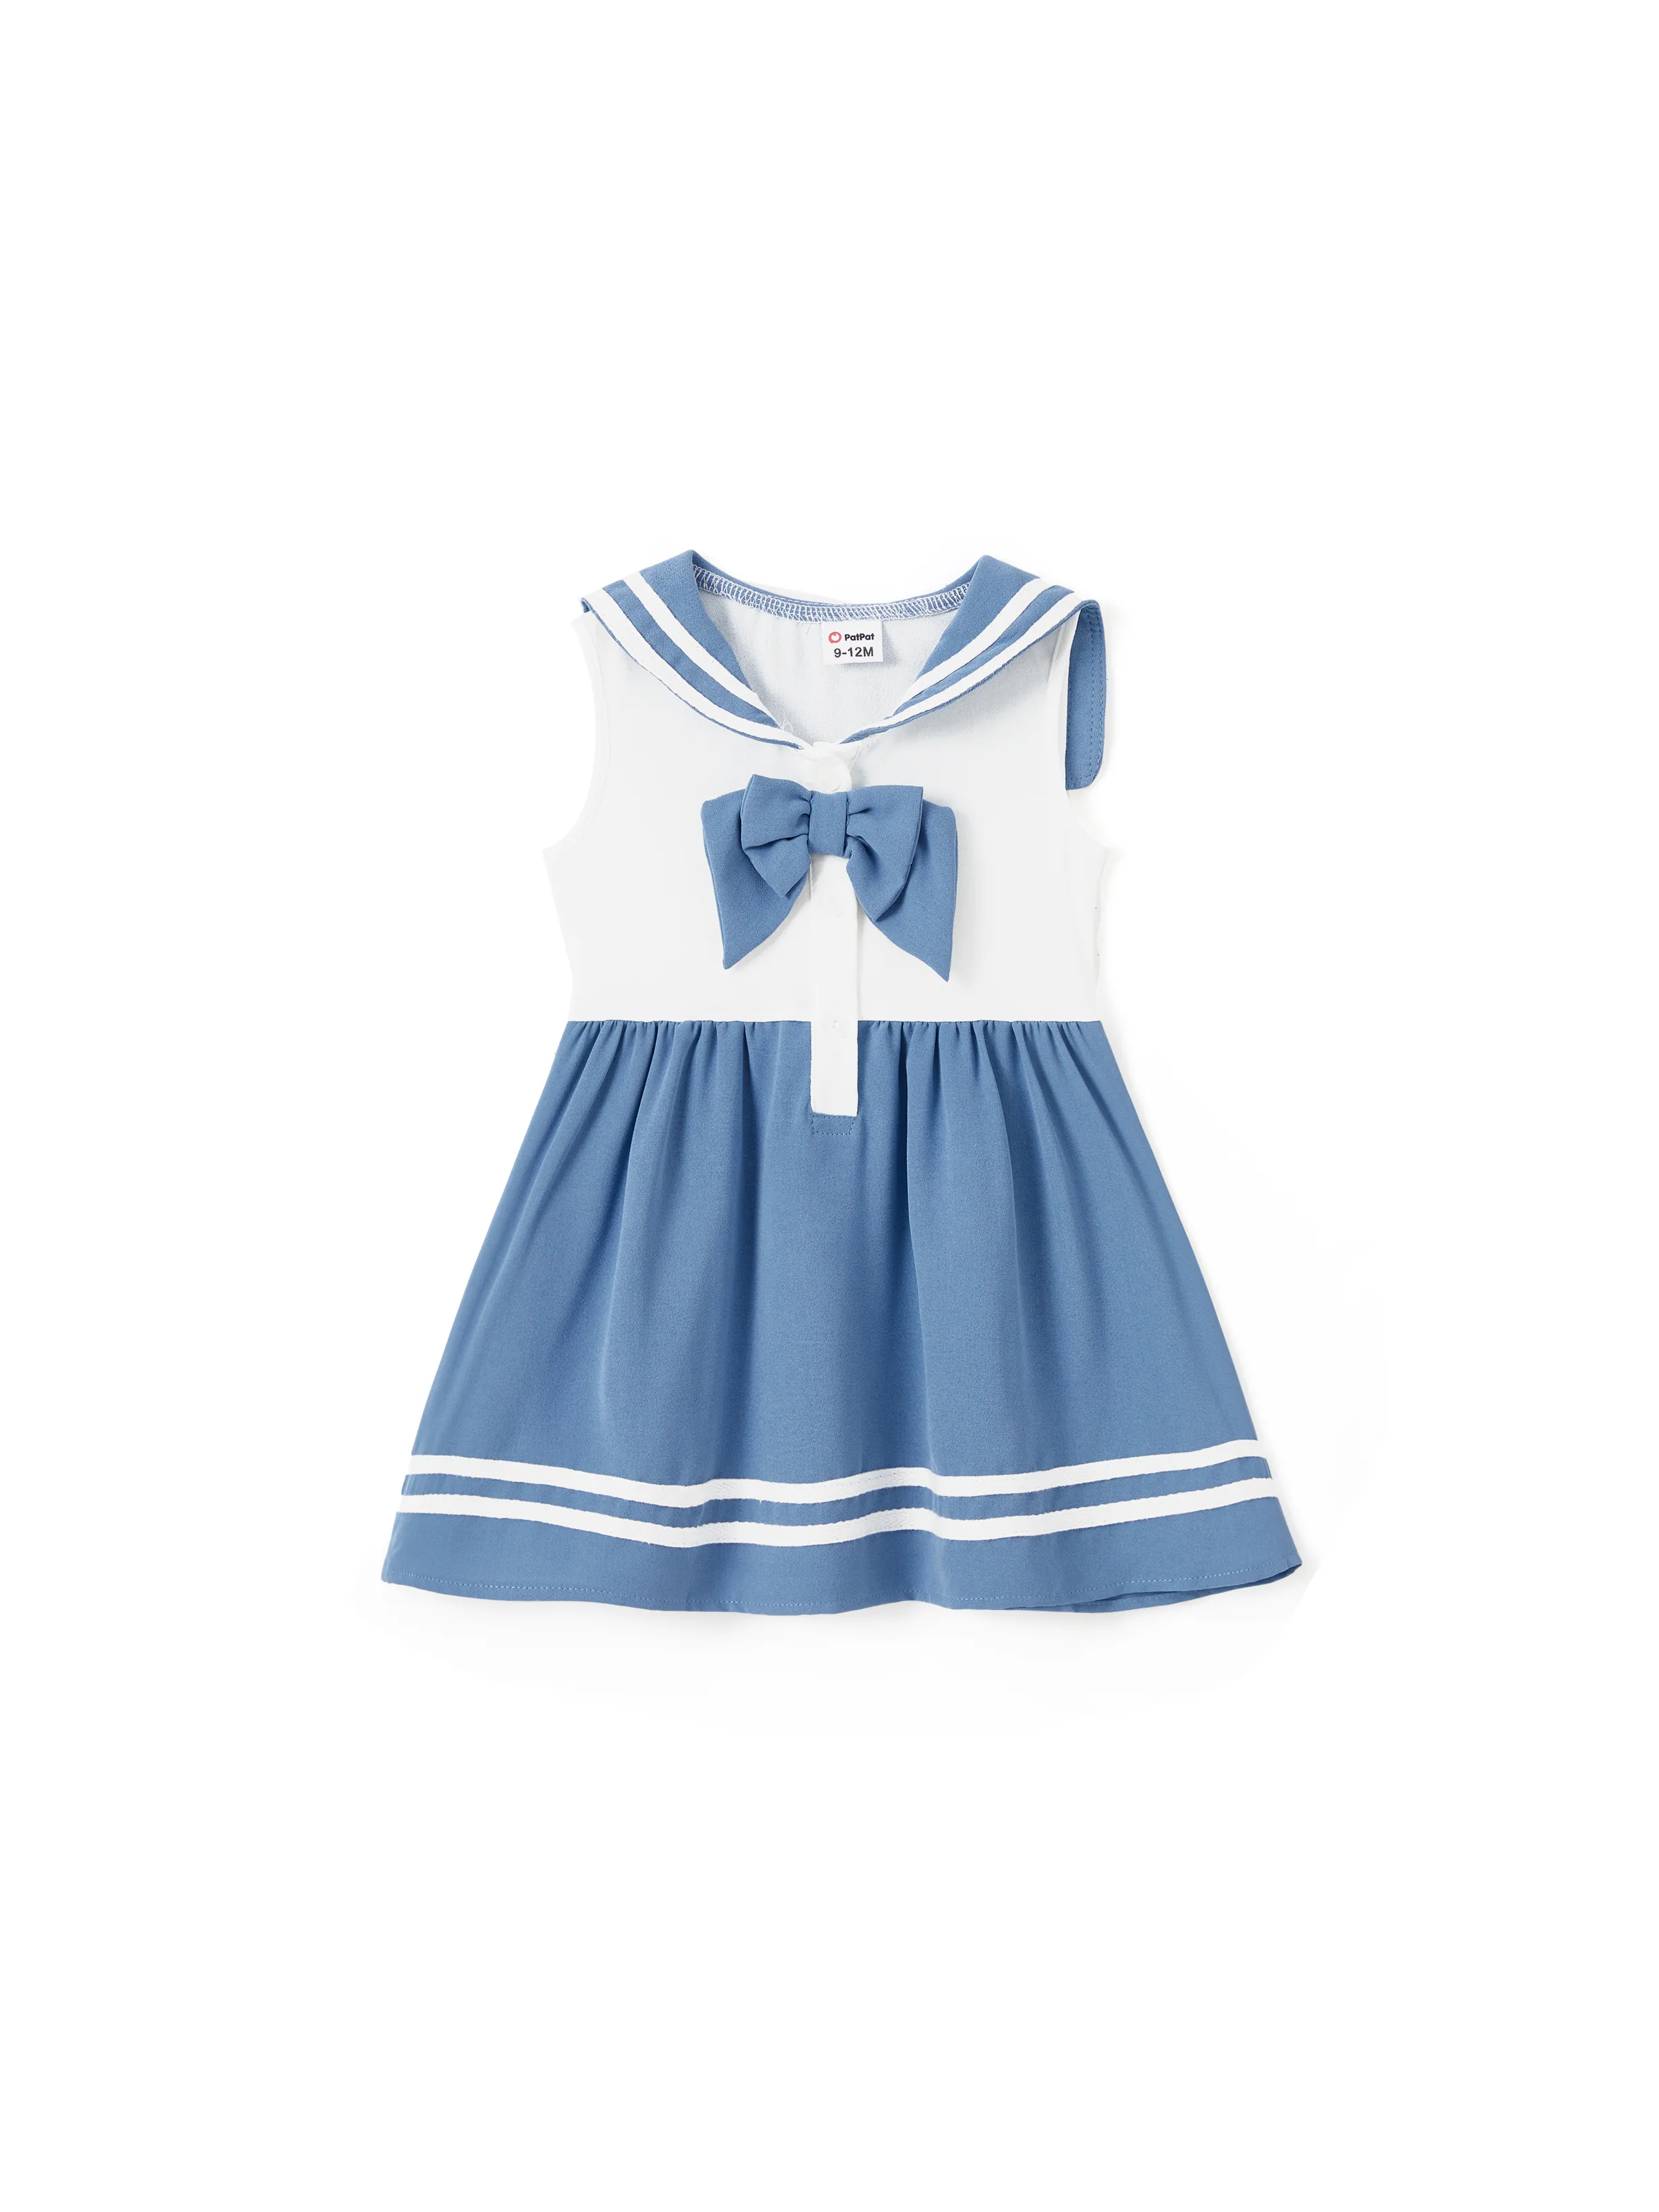 

Family Matching Sets Preppy Style Striped Tee or Sailor Uniform-Inspired Nautical Style Sleeveless Dress